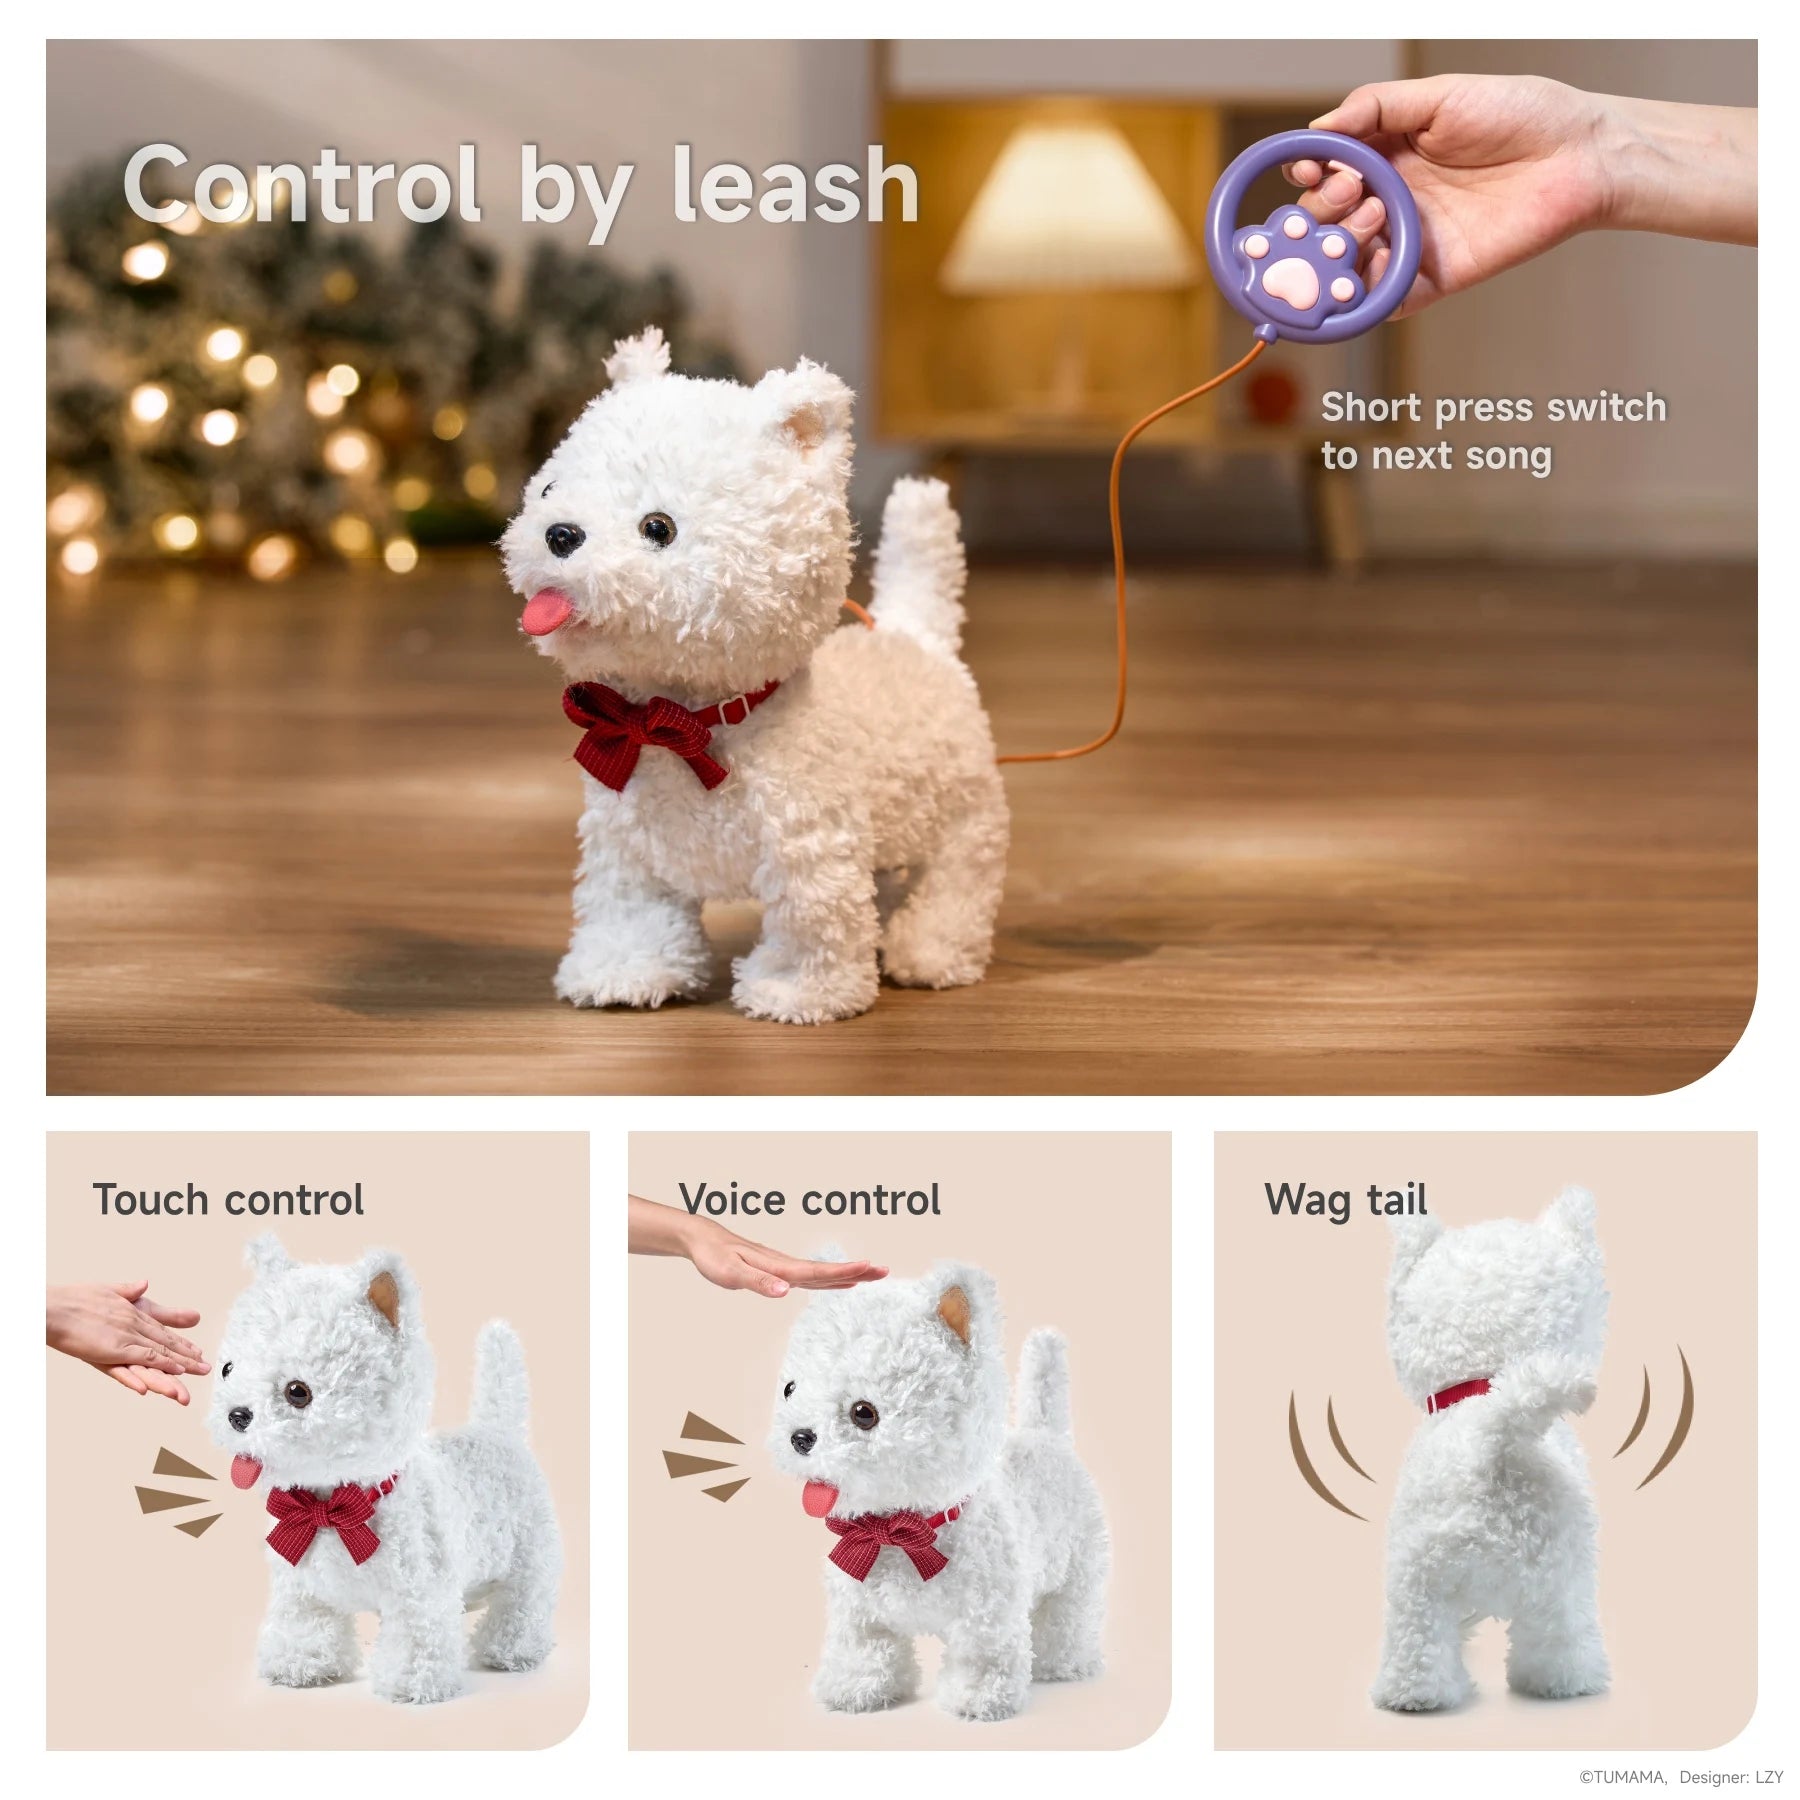 walking dog toy with leash